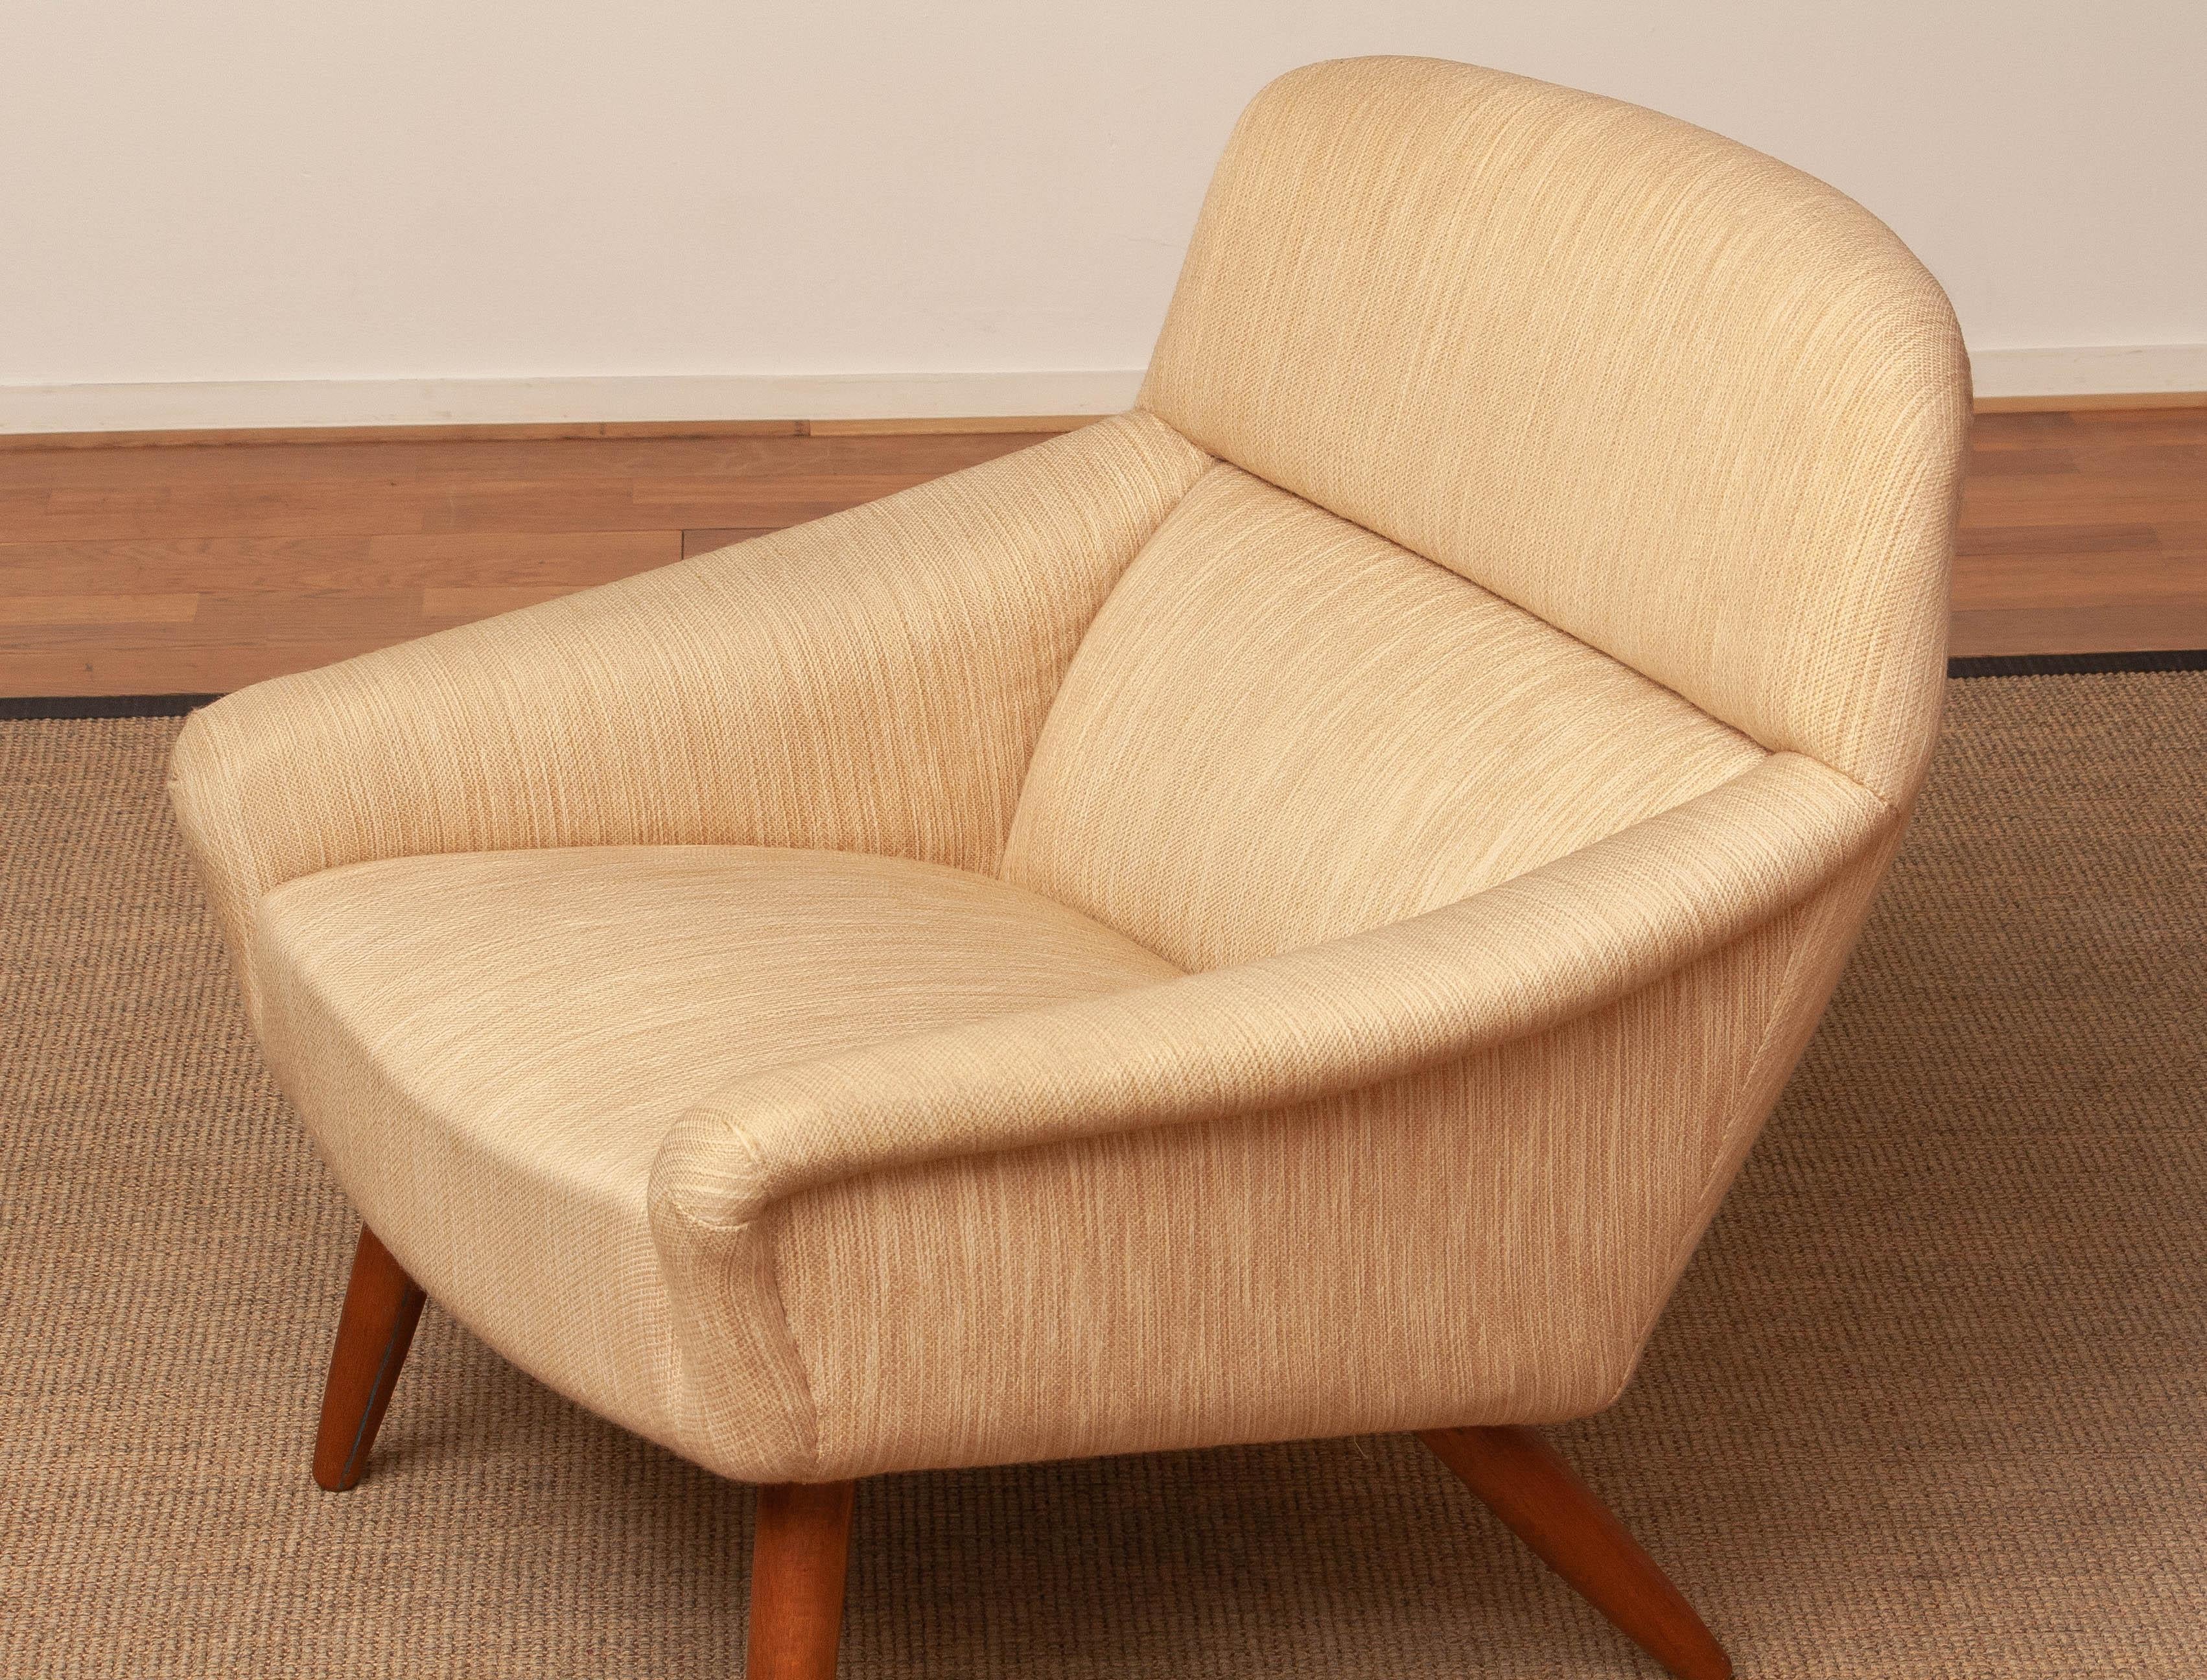 1960s Natural Wool and Oak Lounge Chair by Leif Hansen for Kronen in Denmark For Sale 4